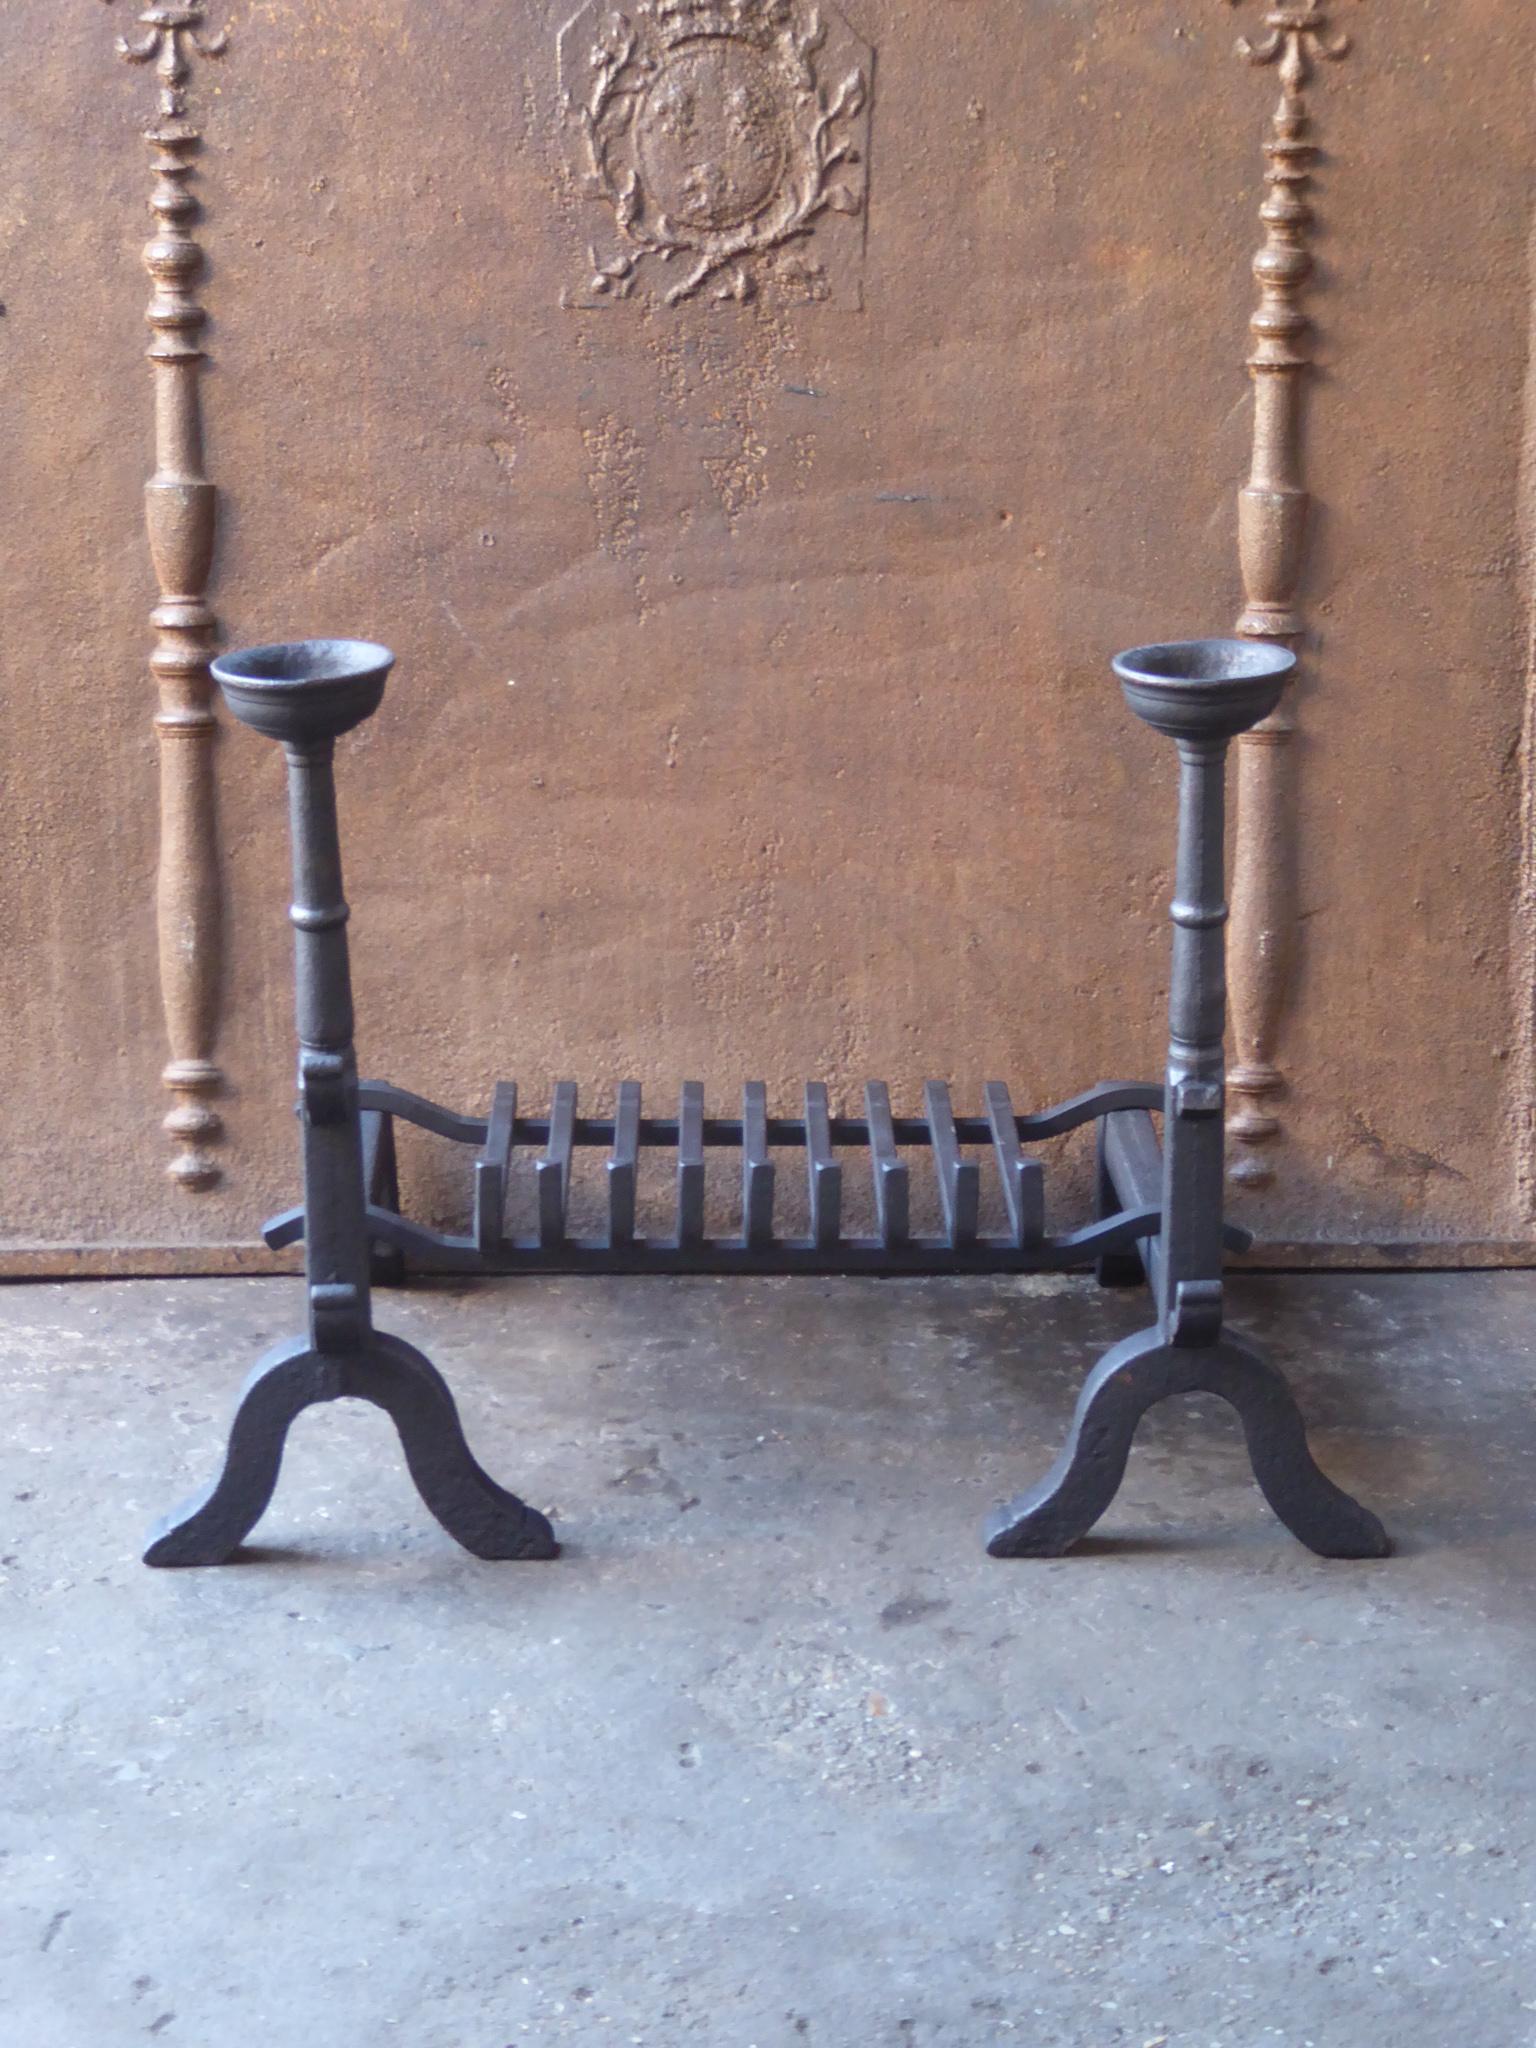 20th Century French Neo-gothic fireplace basket - fire basket made of wrought iron and cast iron. The basket is in a good condition and is fully functional. The total width of the front of the fireplace grate is 70.0 cm or 27.6 inch.